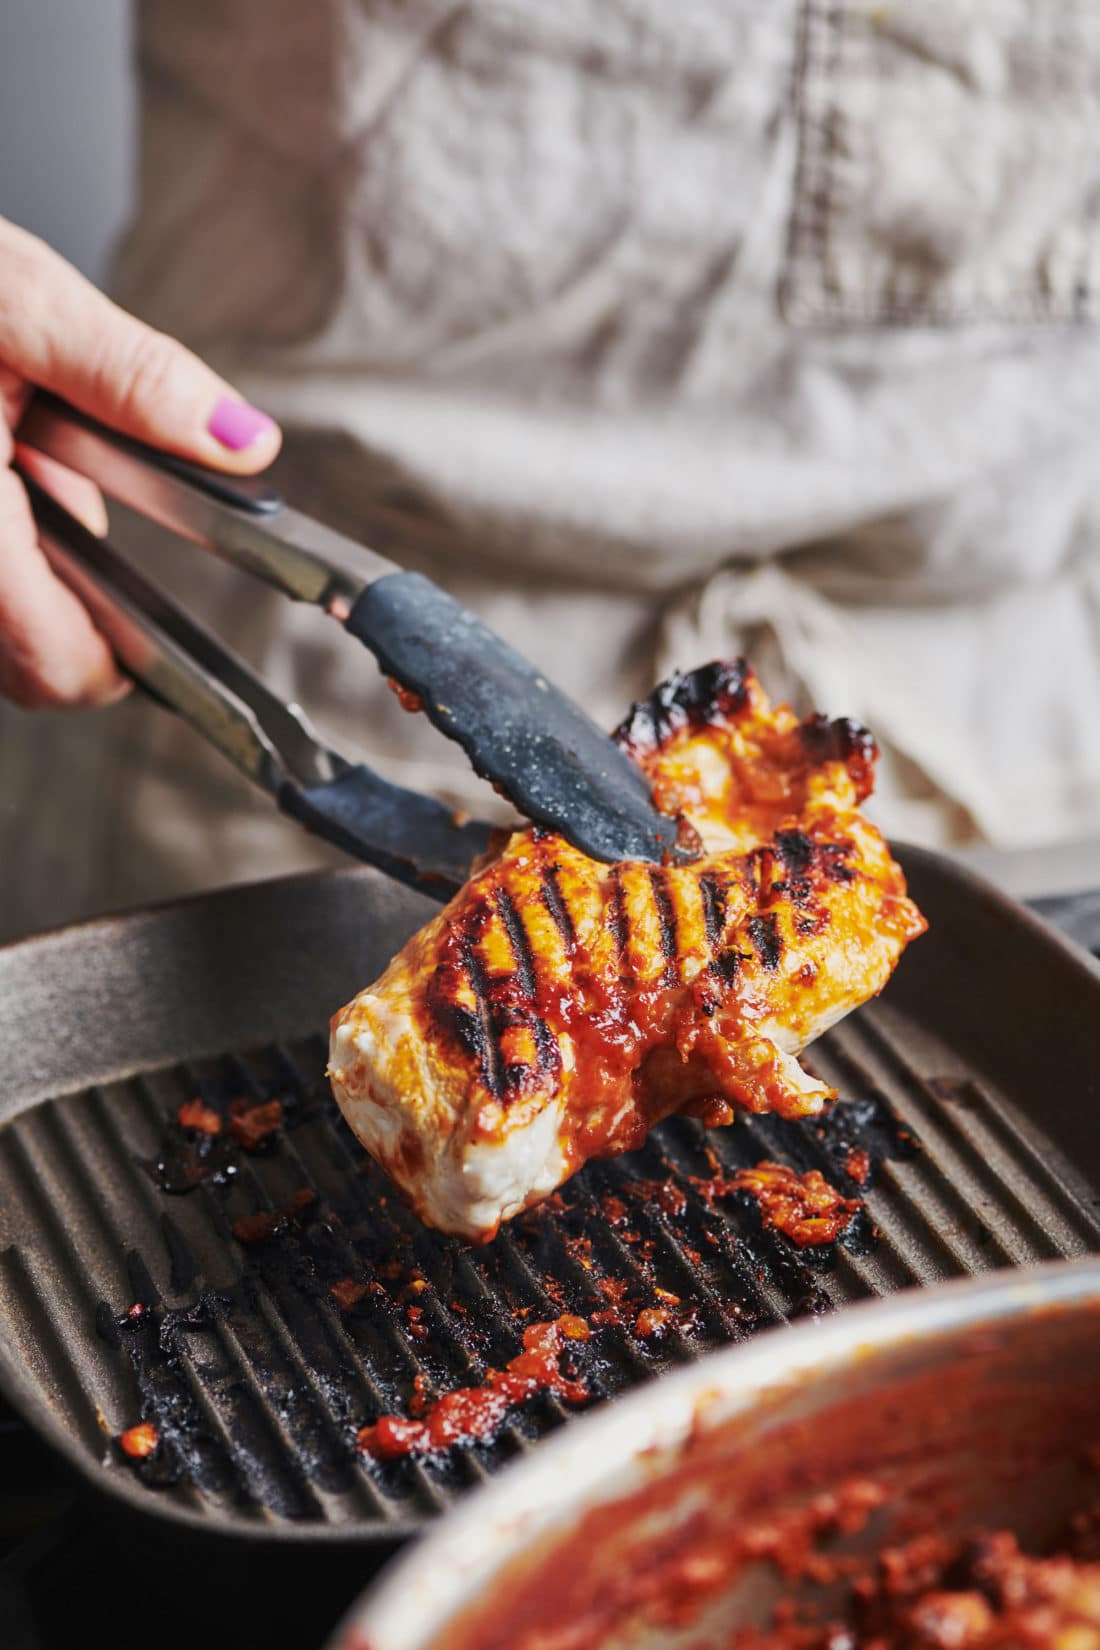 Tongs flipping chicken on a grill pan.